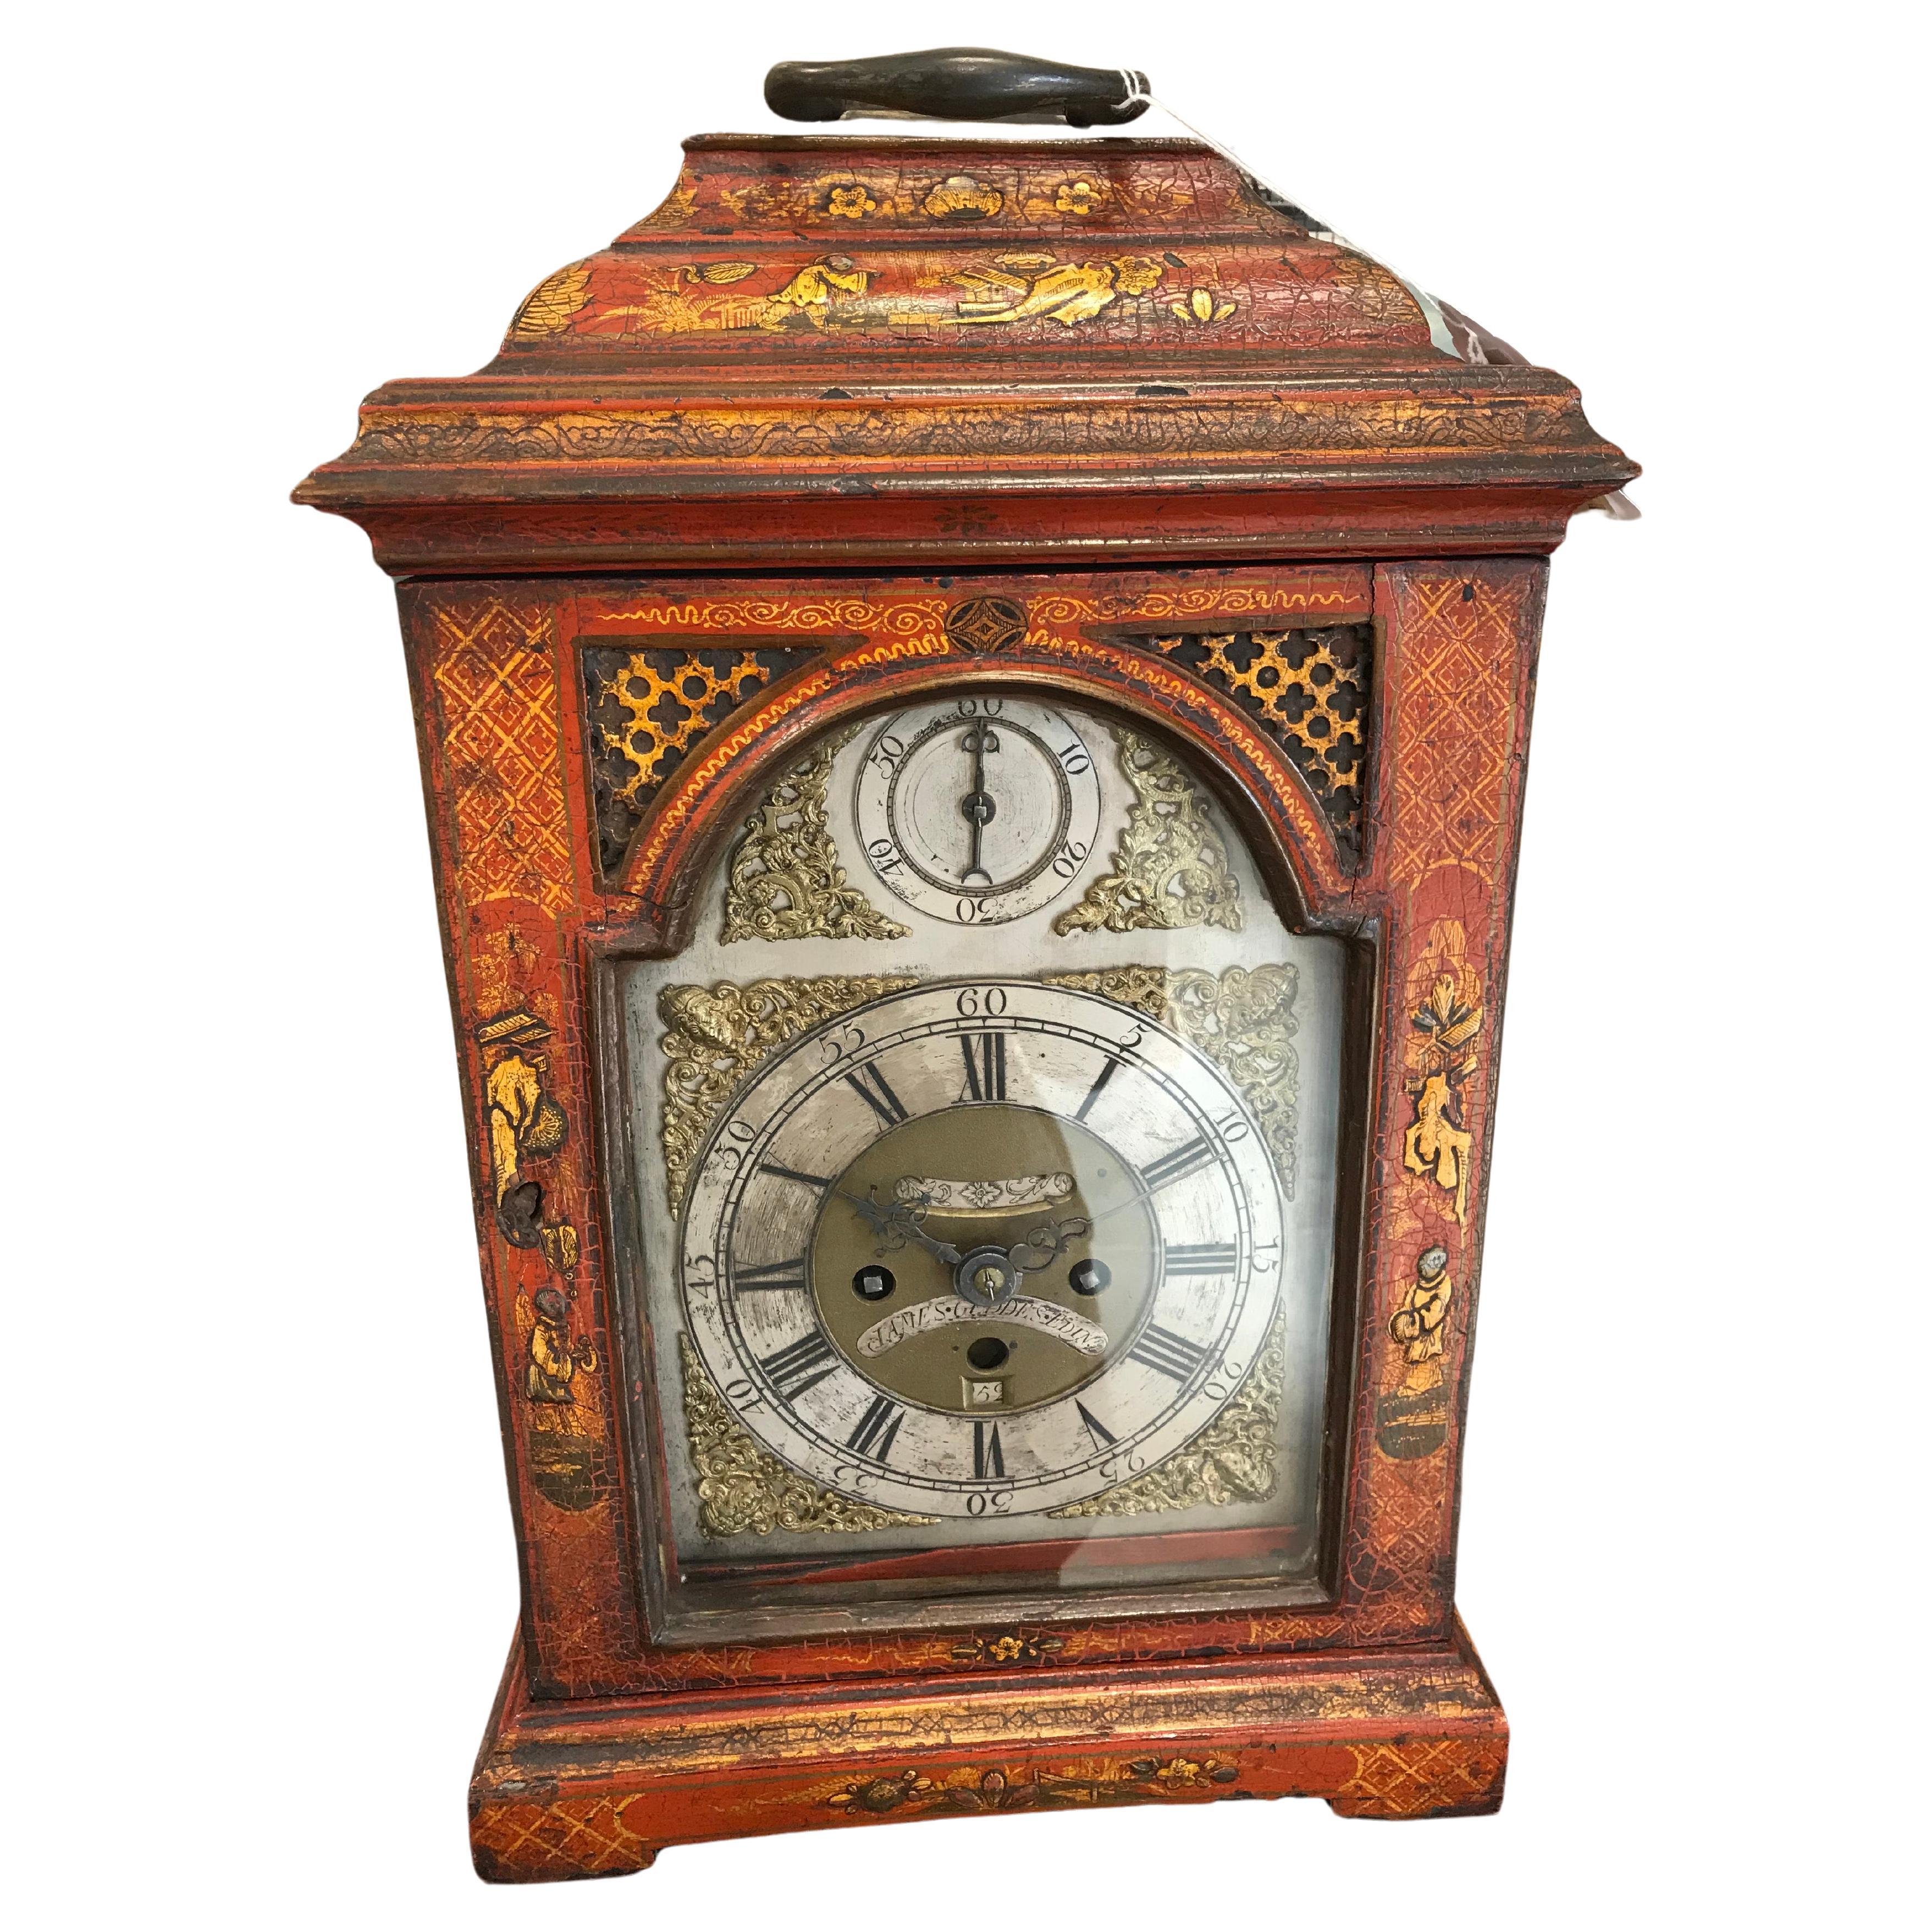 A beautiful Early 18th Century bracket clock with original red lacquer chinoiserie decoration by James Geddes 1728-1755 of Edinburgh 
Originally with Verge escapement converted to anchor escapement in the Victorian times. Runs beautifully and has